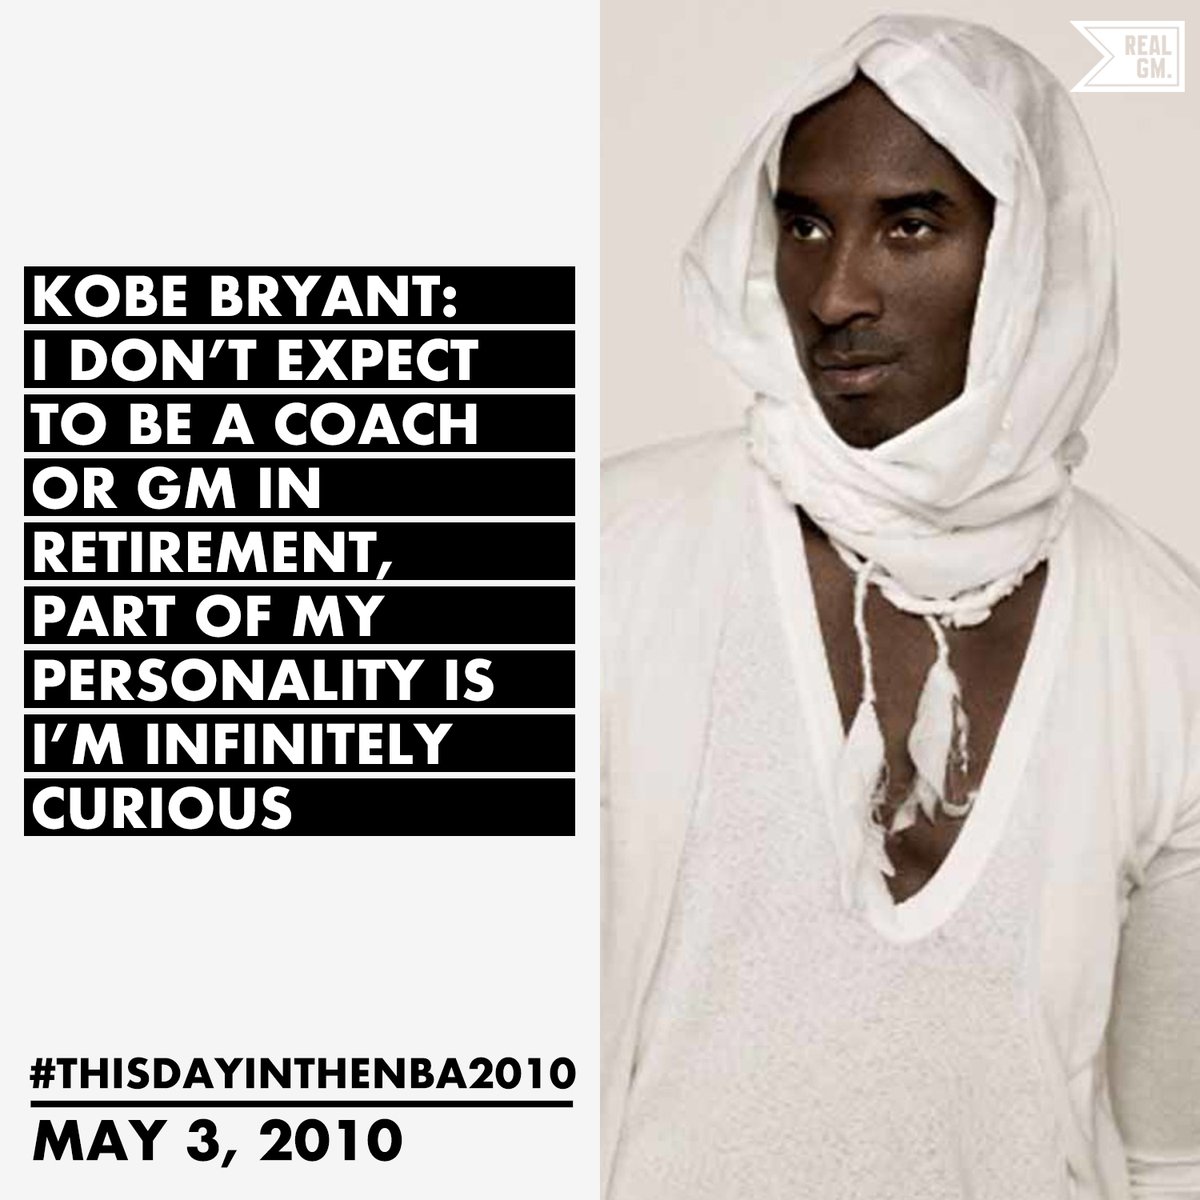  #ThisDayInTheNBA2010May 3, 2010Kobe Bryant: Kobe Bryant: I Don't Expect To Be A Coach Or GM In Retirement, Part Of My Personality Is I'm Infinitely Curious  https://basketball.realgm.com/wiretap/203654/Kobe-Bryant-I-Dont-Expect-To-Be-A-Coach-Or-GM-In-Retirement